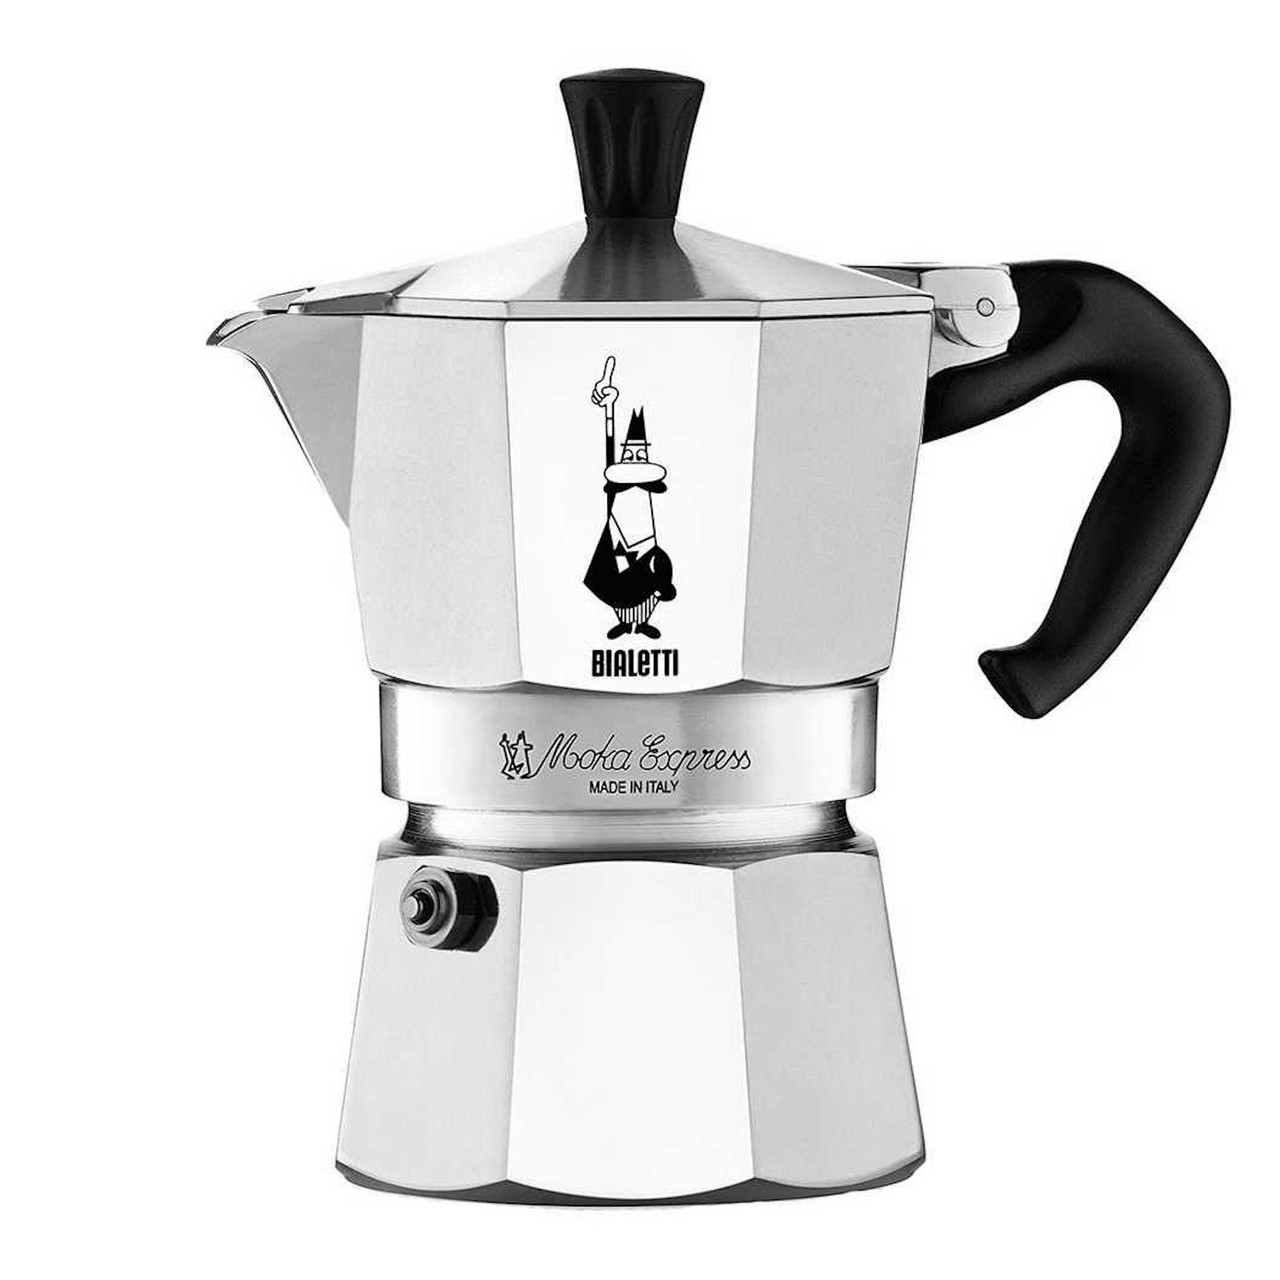 https://cdn11.bigcommerce.com/s-4a086/images/stencil/1280x1280/products/1755/10294/BIALETTI_MOKA_EXPRESS_2_Cup_-_02__06288.1630816488.jpg?c=2